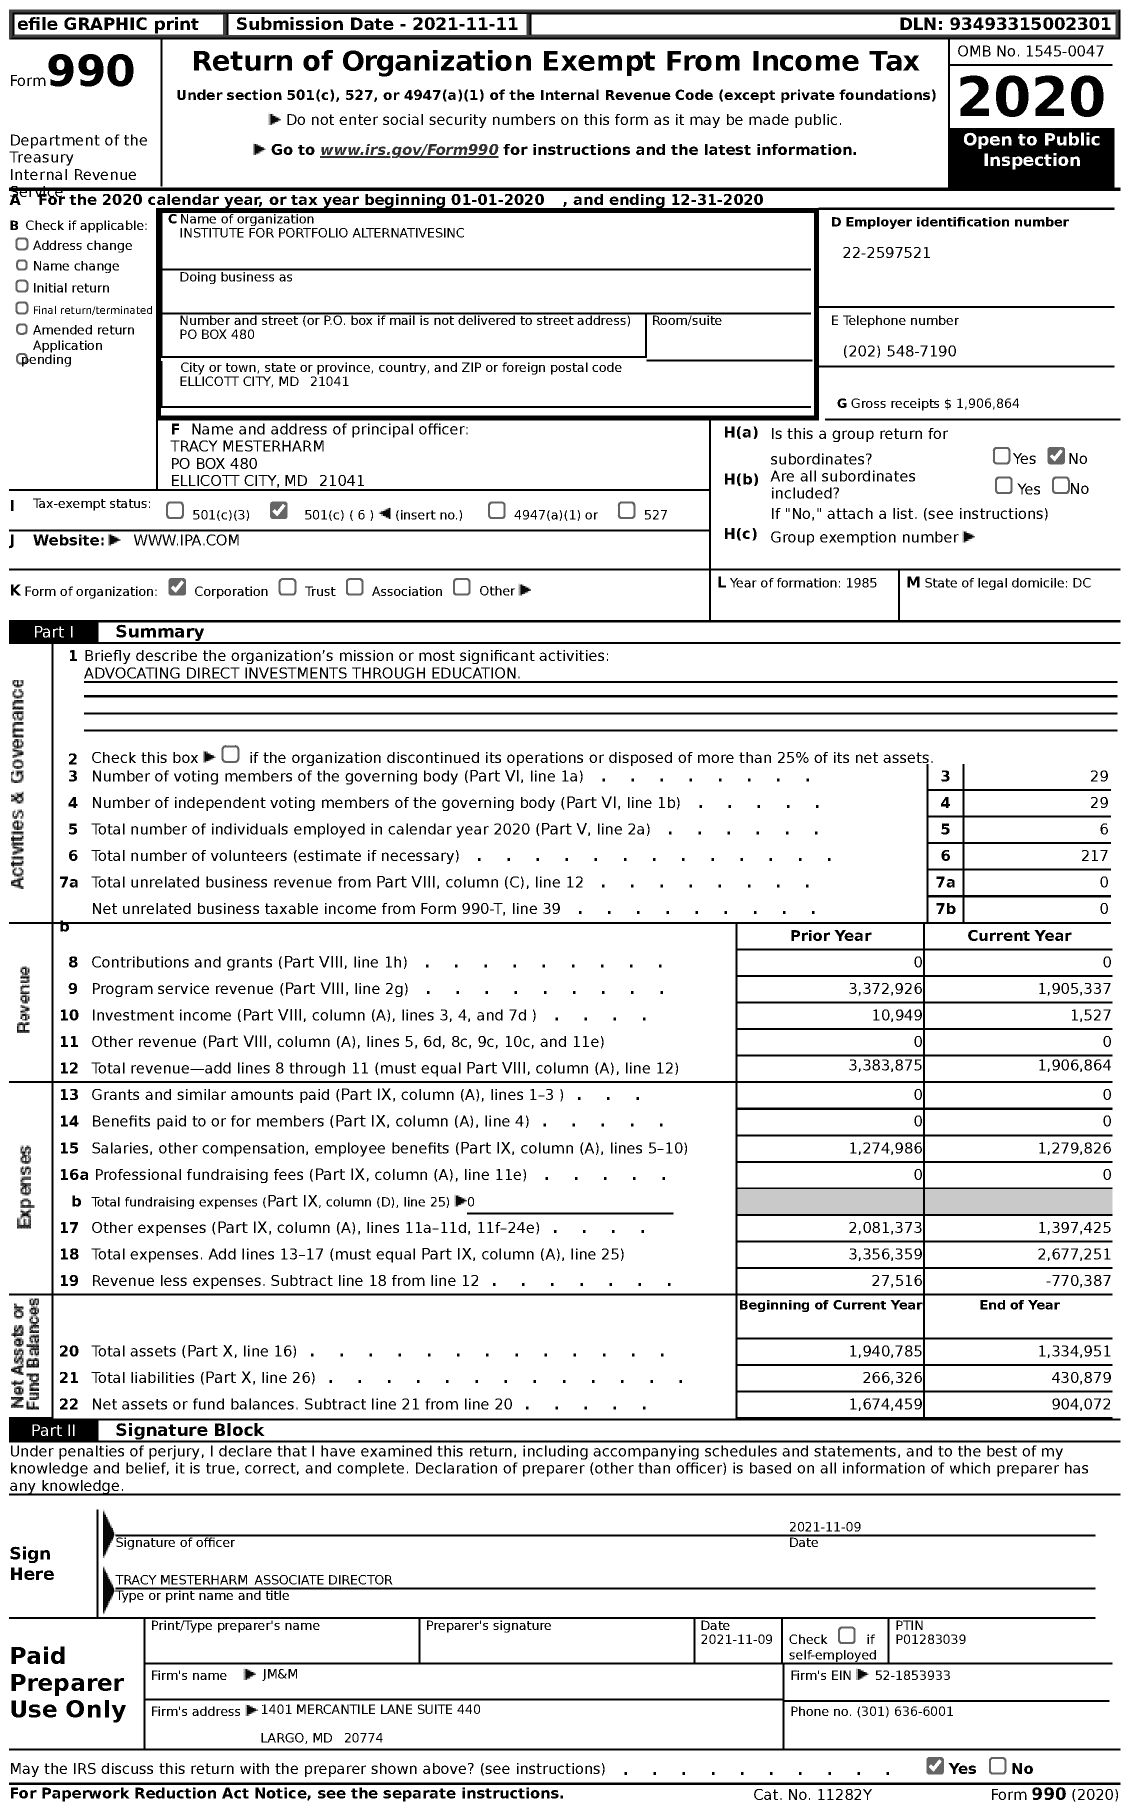 Image of first page of 2020 Form 990 for Institute for Portfolio Alternatives (IPA)